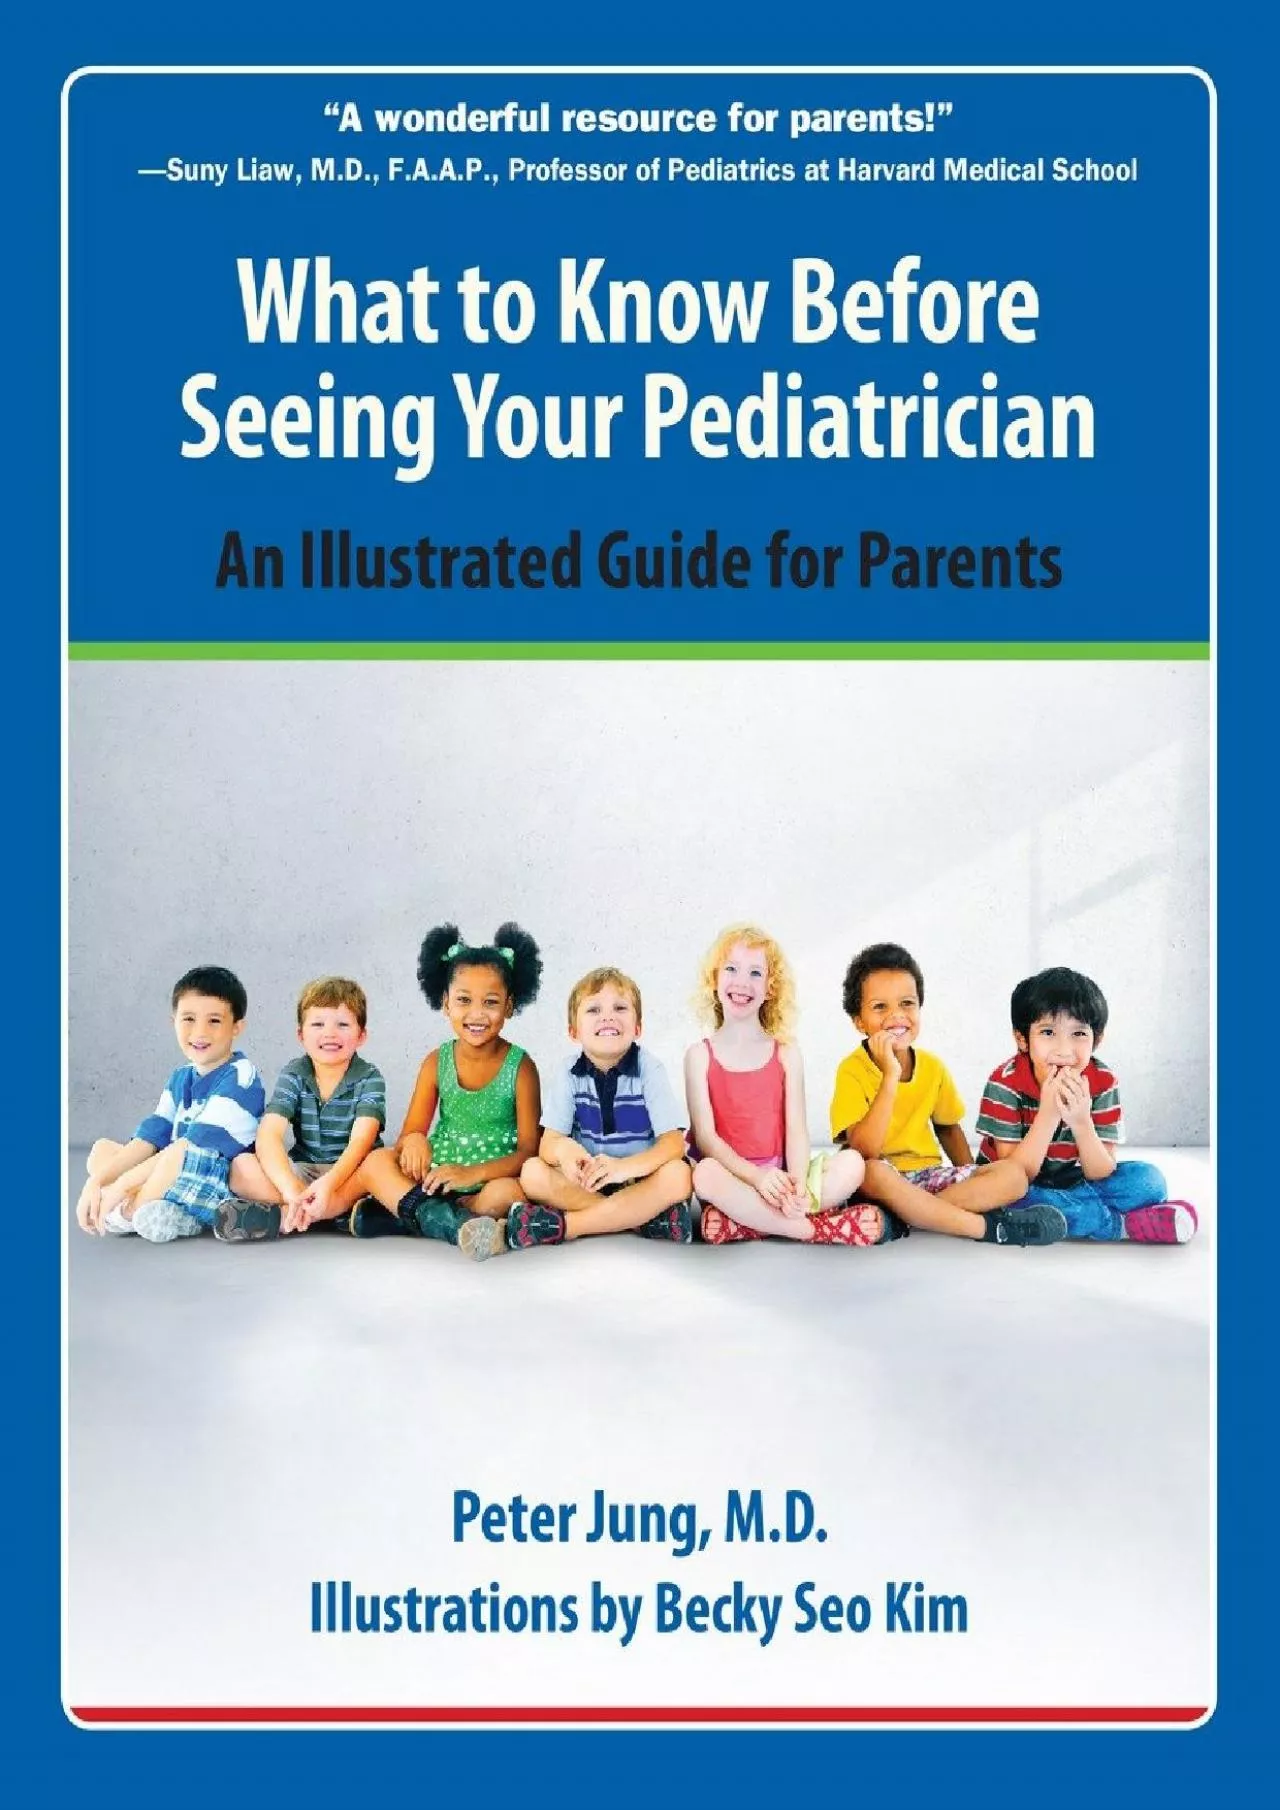 (DOWNLOAD)-What to Know Before Seeing Your Pediatrician: An Illustrated Guide for Parents